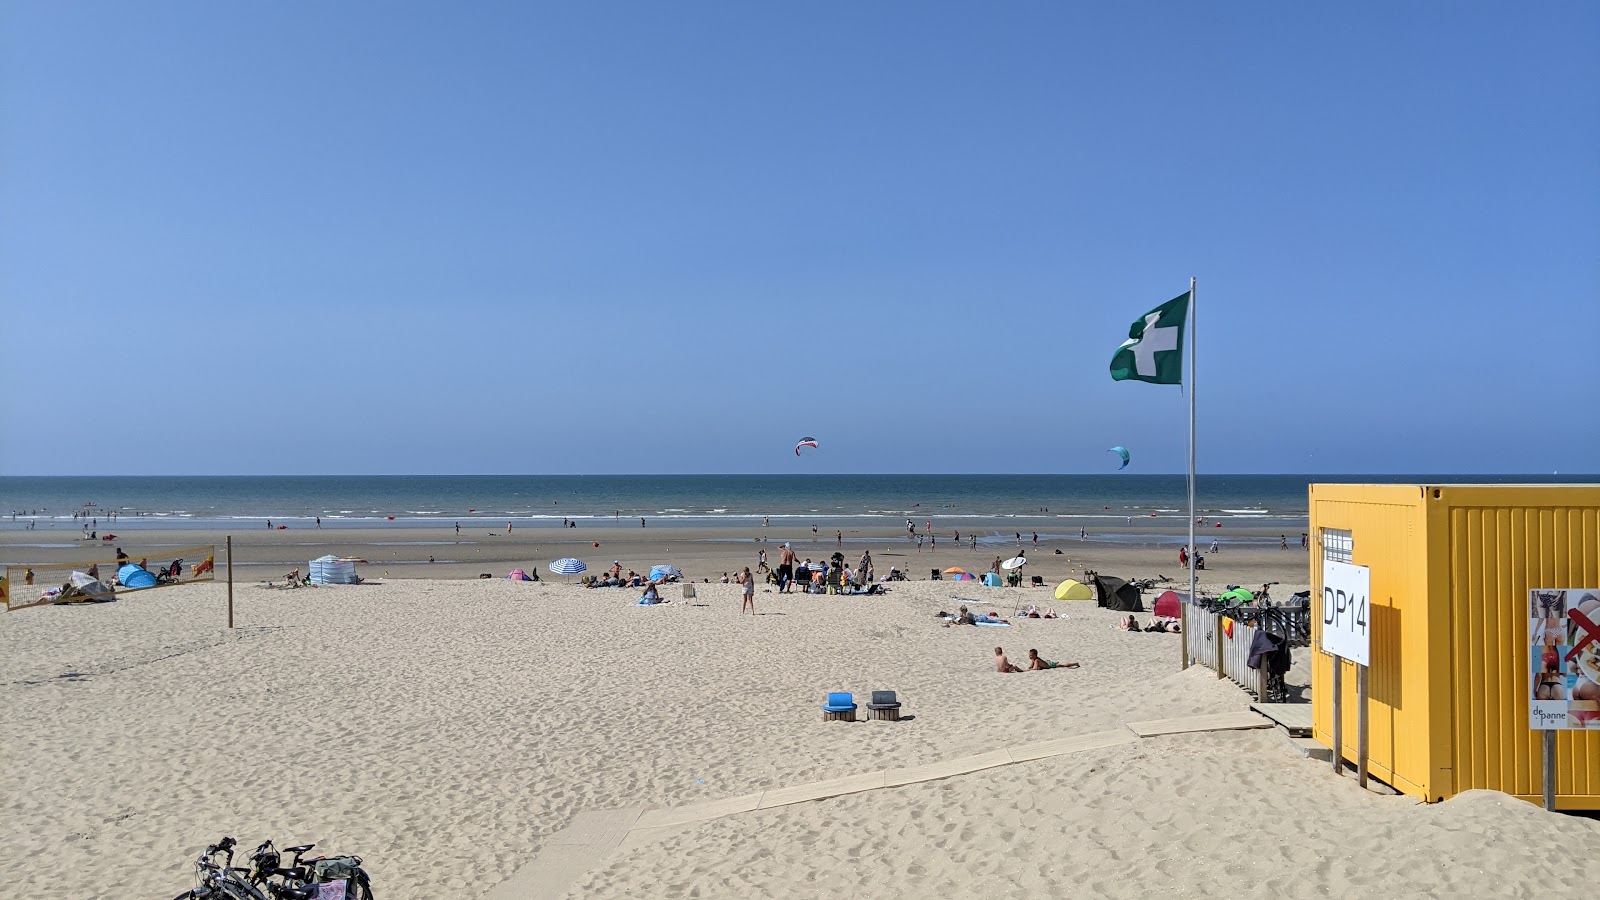 Photo of De Panne Strand with long bay